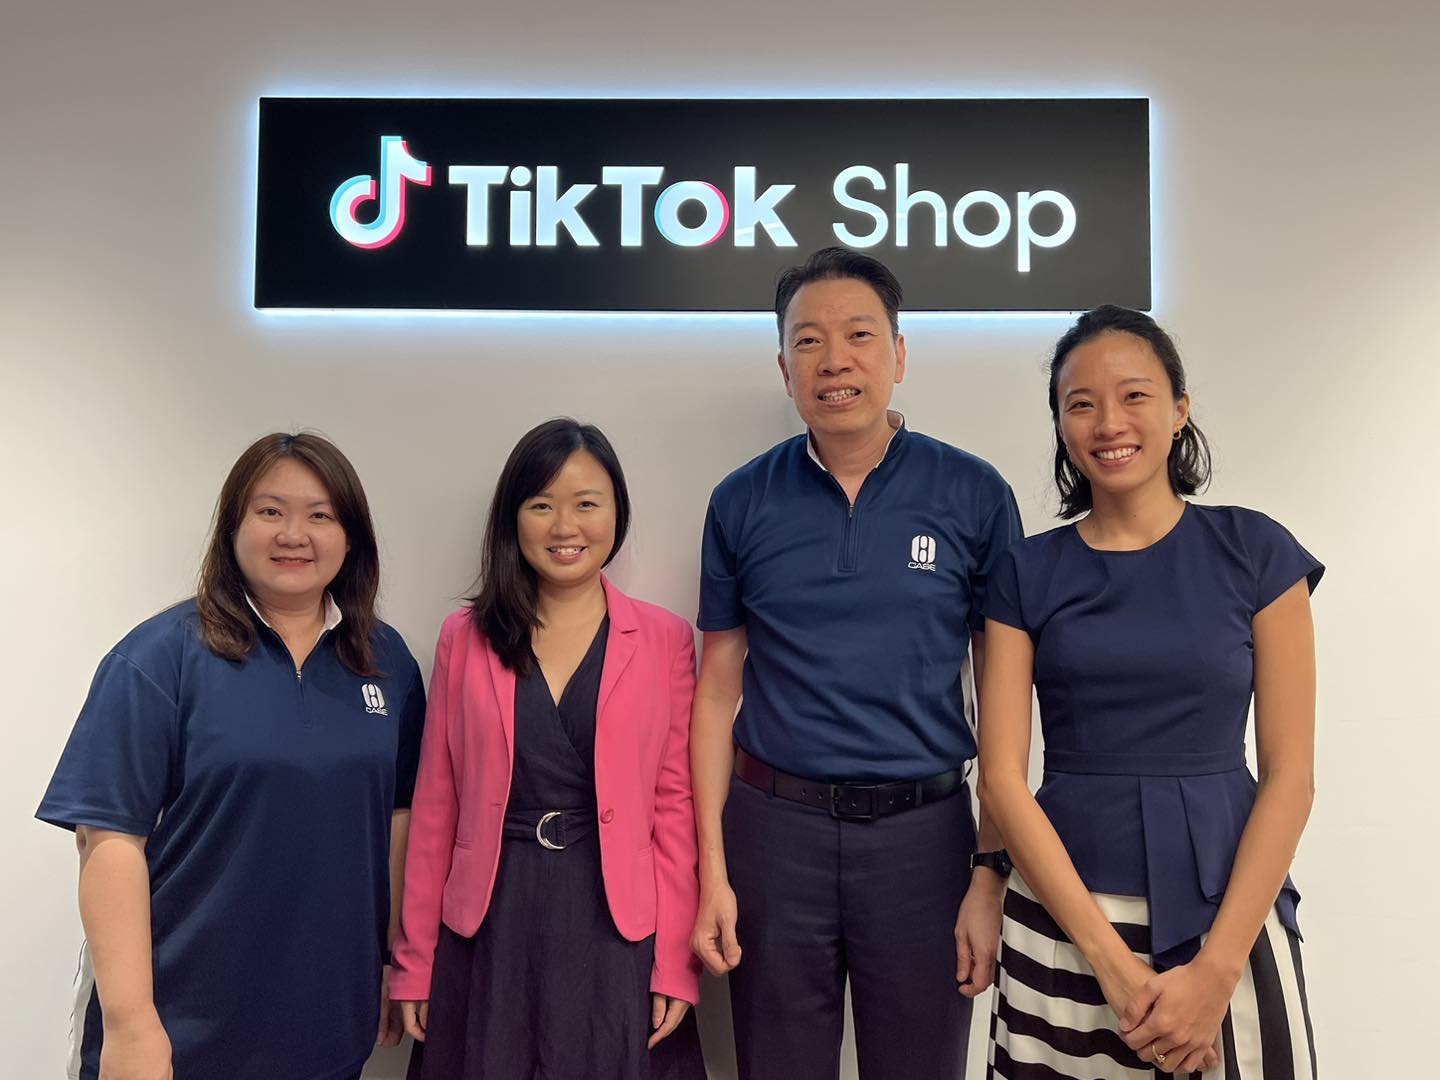 I went on a learning journey to ByteDance together with colleagues from CASE and learnt about the various measures put in place to protect consumers who buy from TikTok Shop.